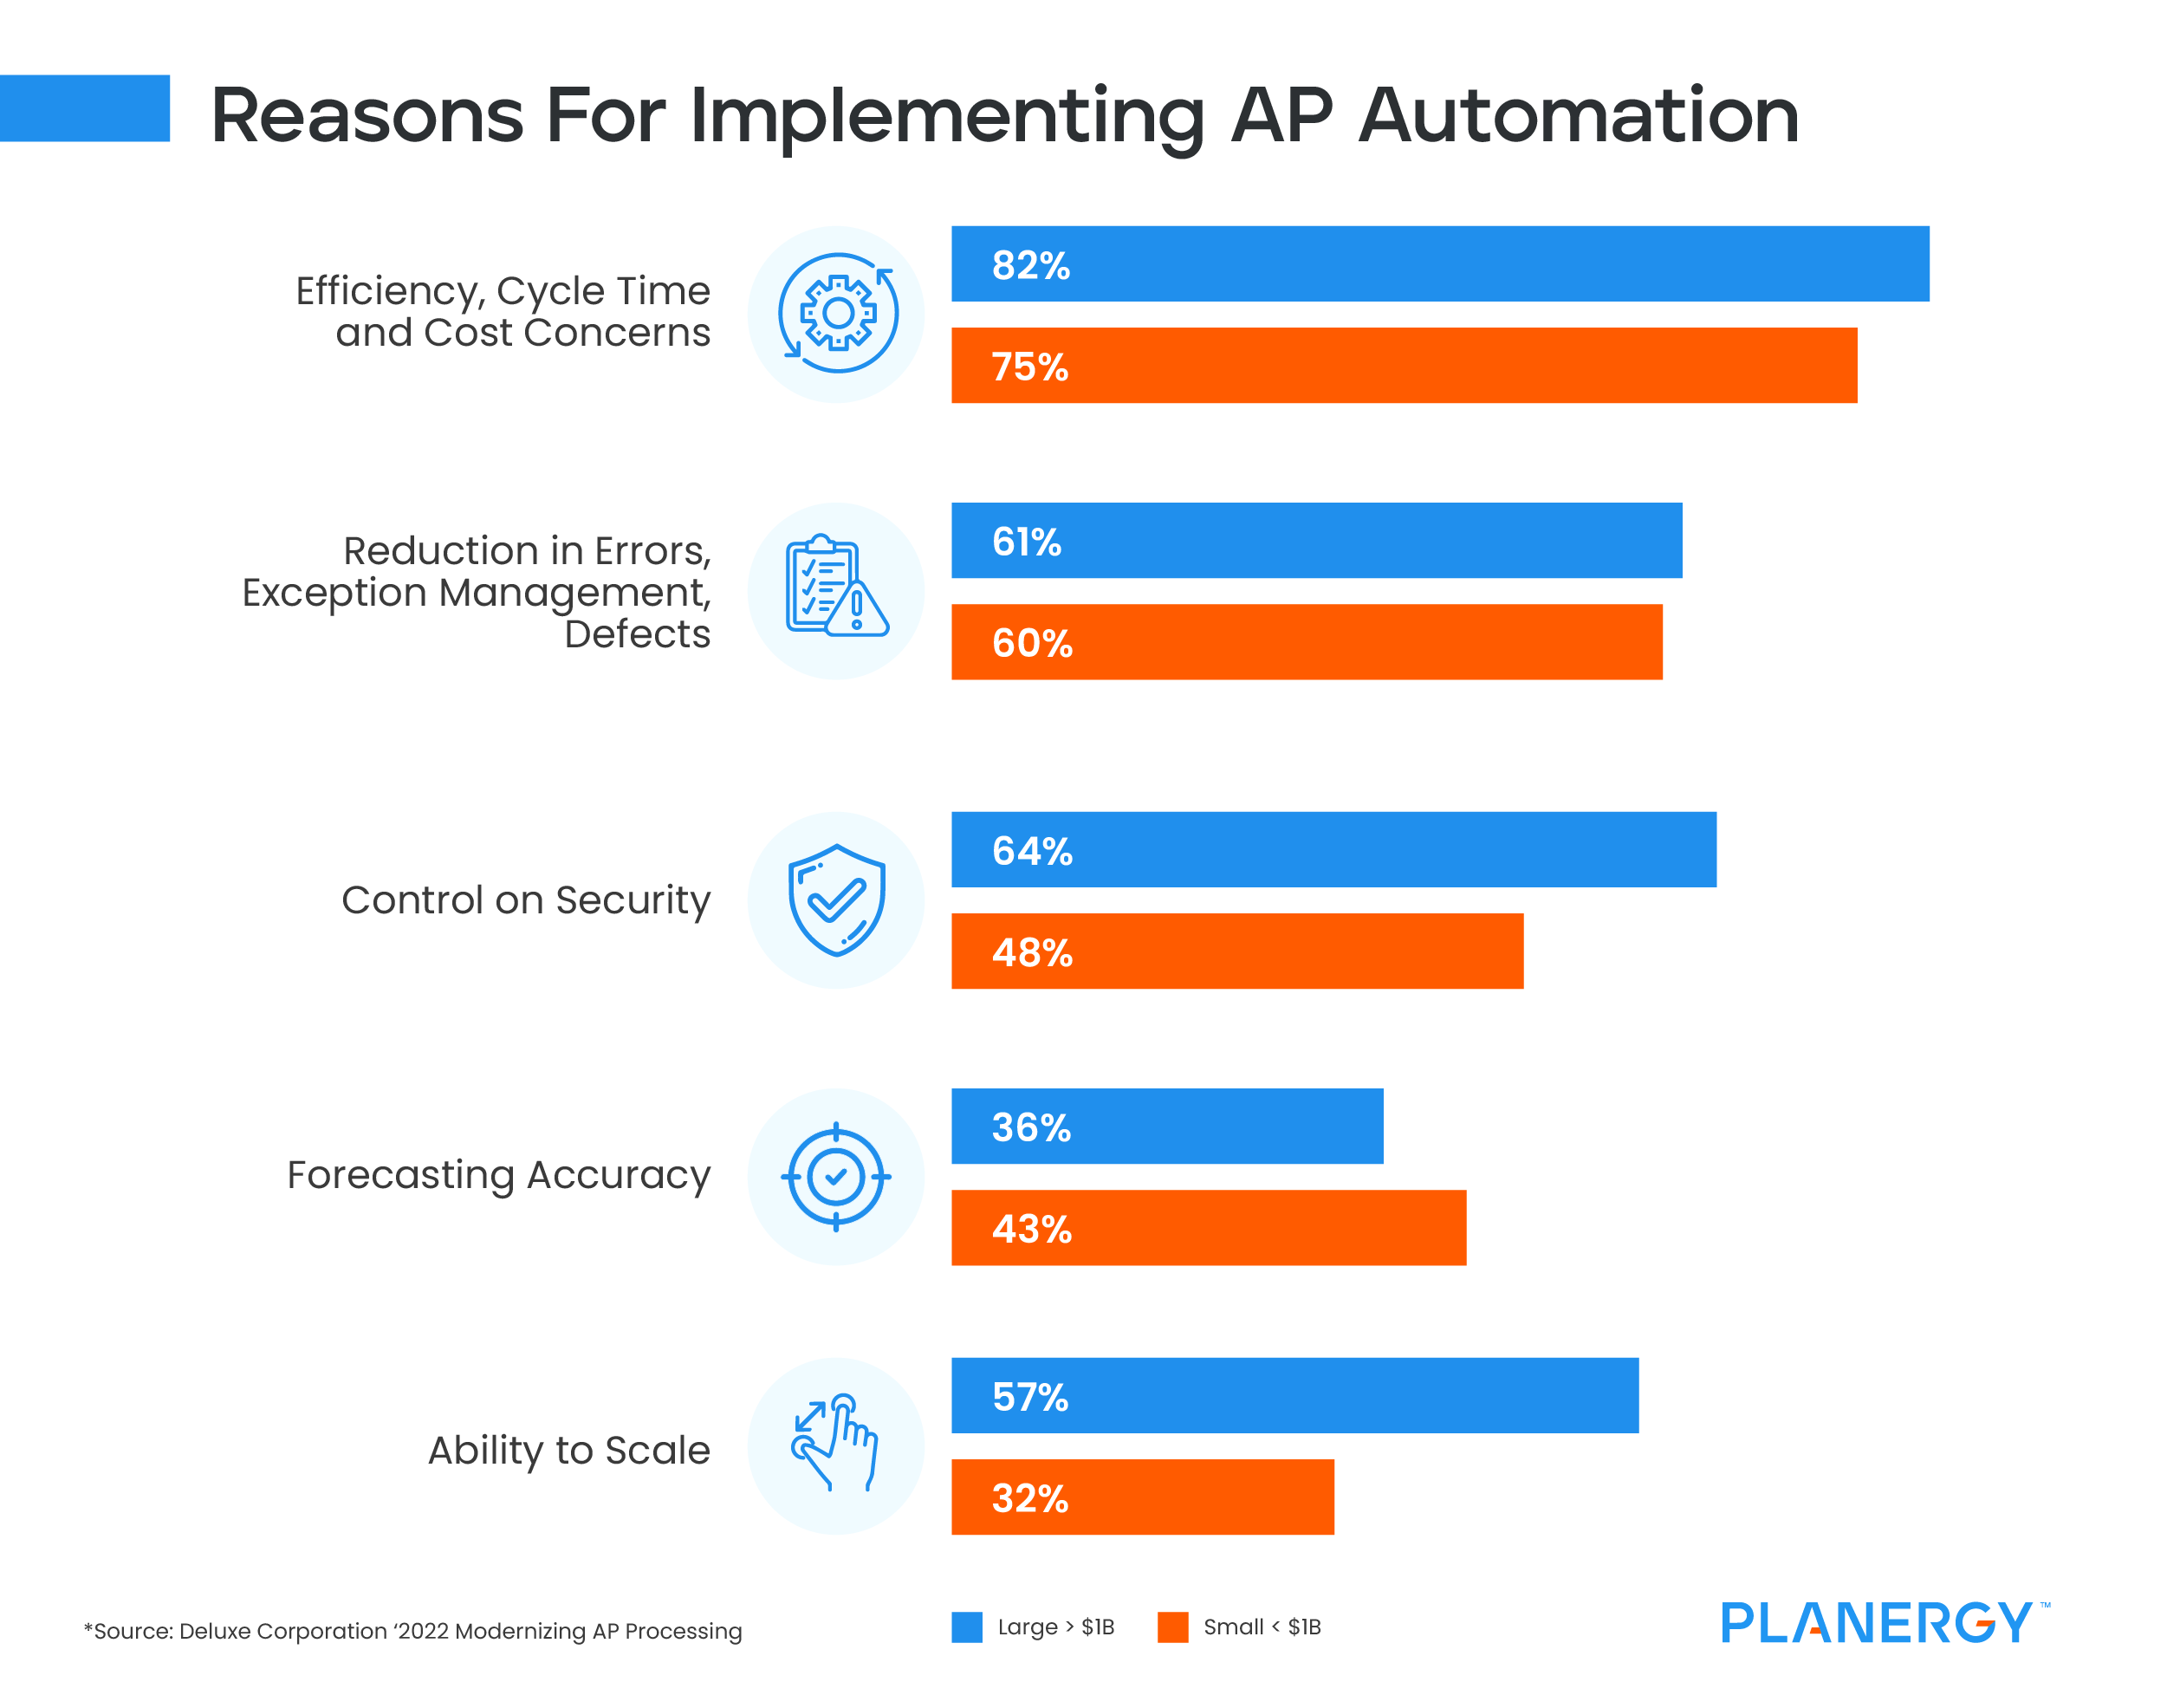 Reasons for Implementing Accounts Payable Automation